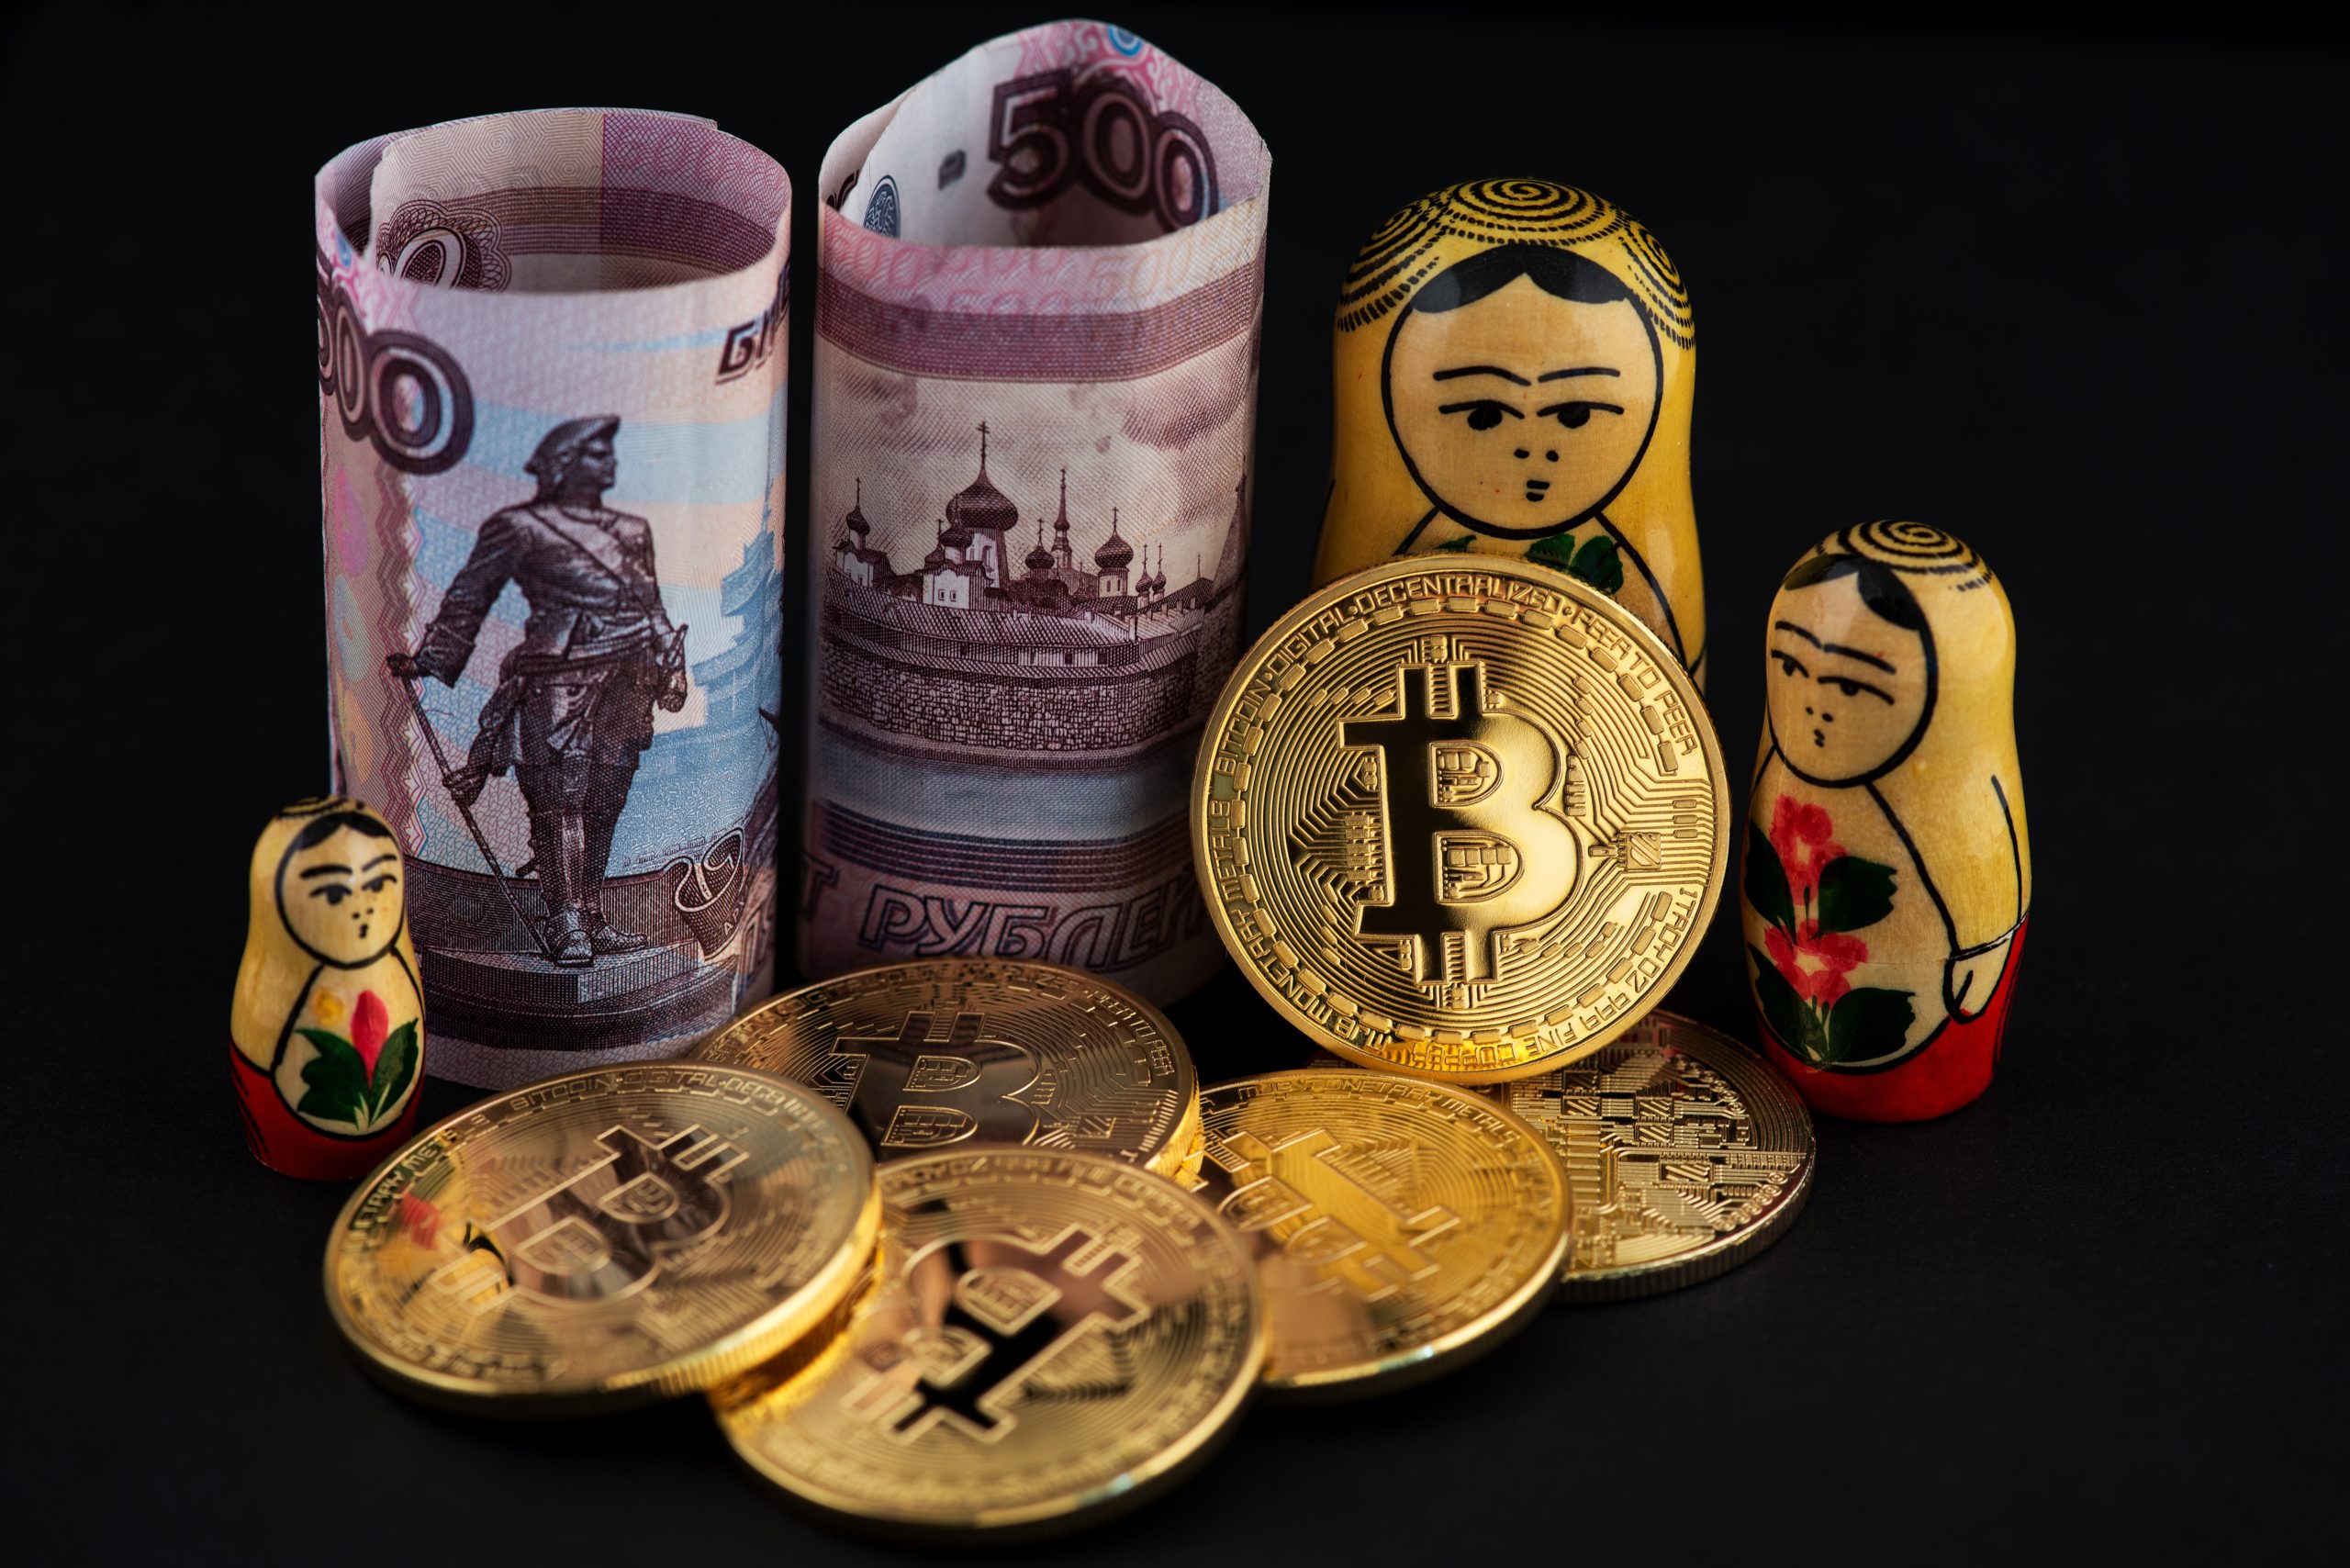 Amid sanctions, Russia weighs crypto for international payments